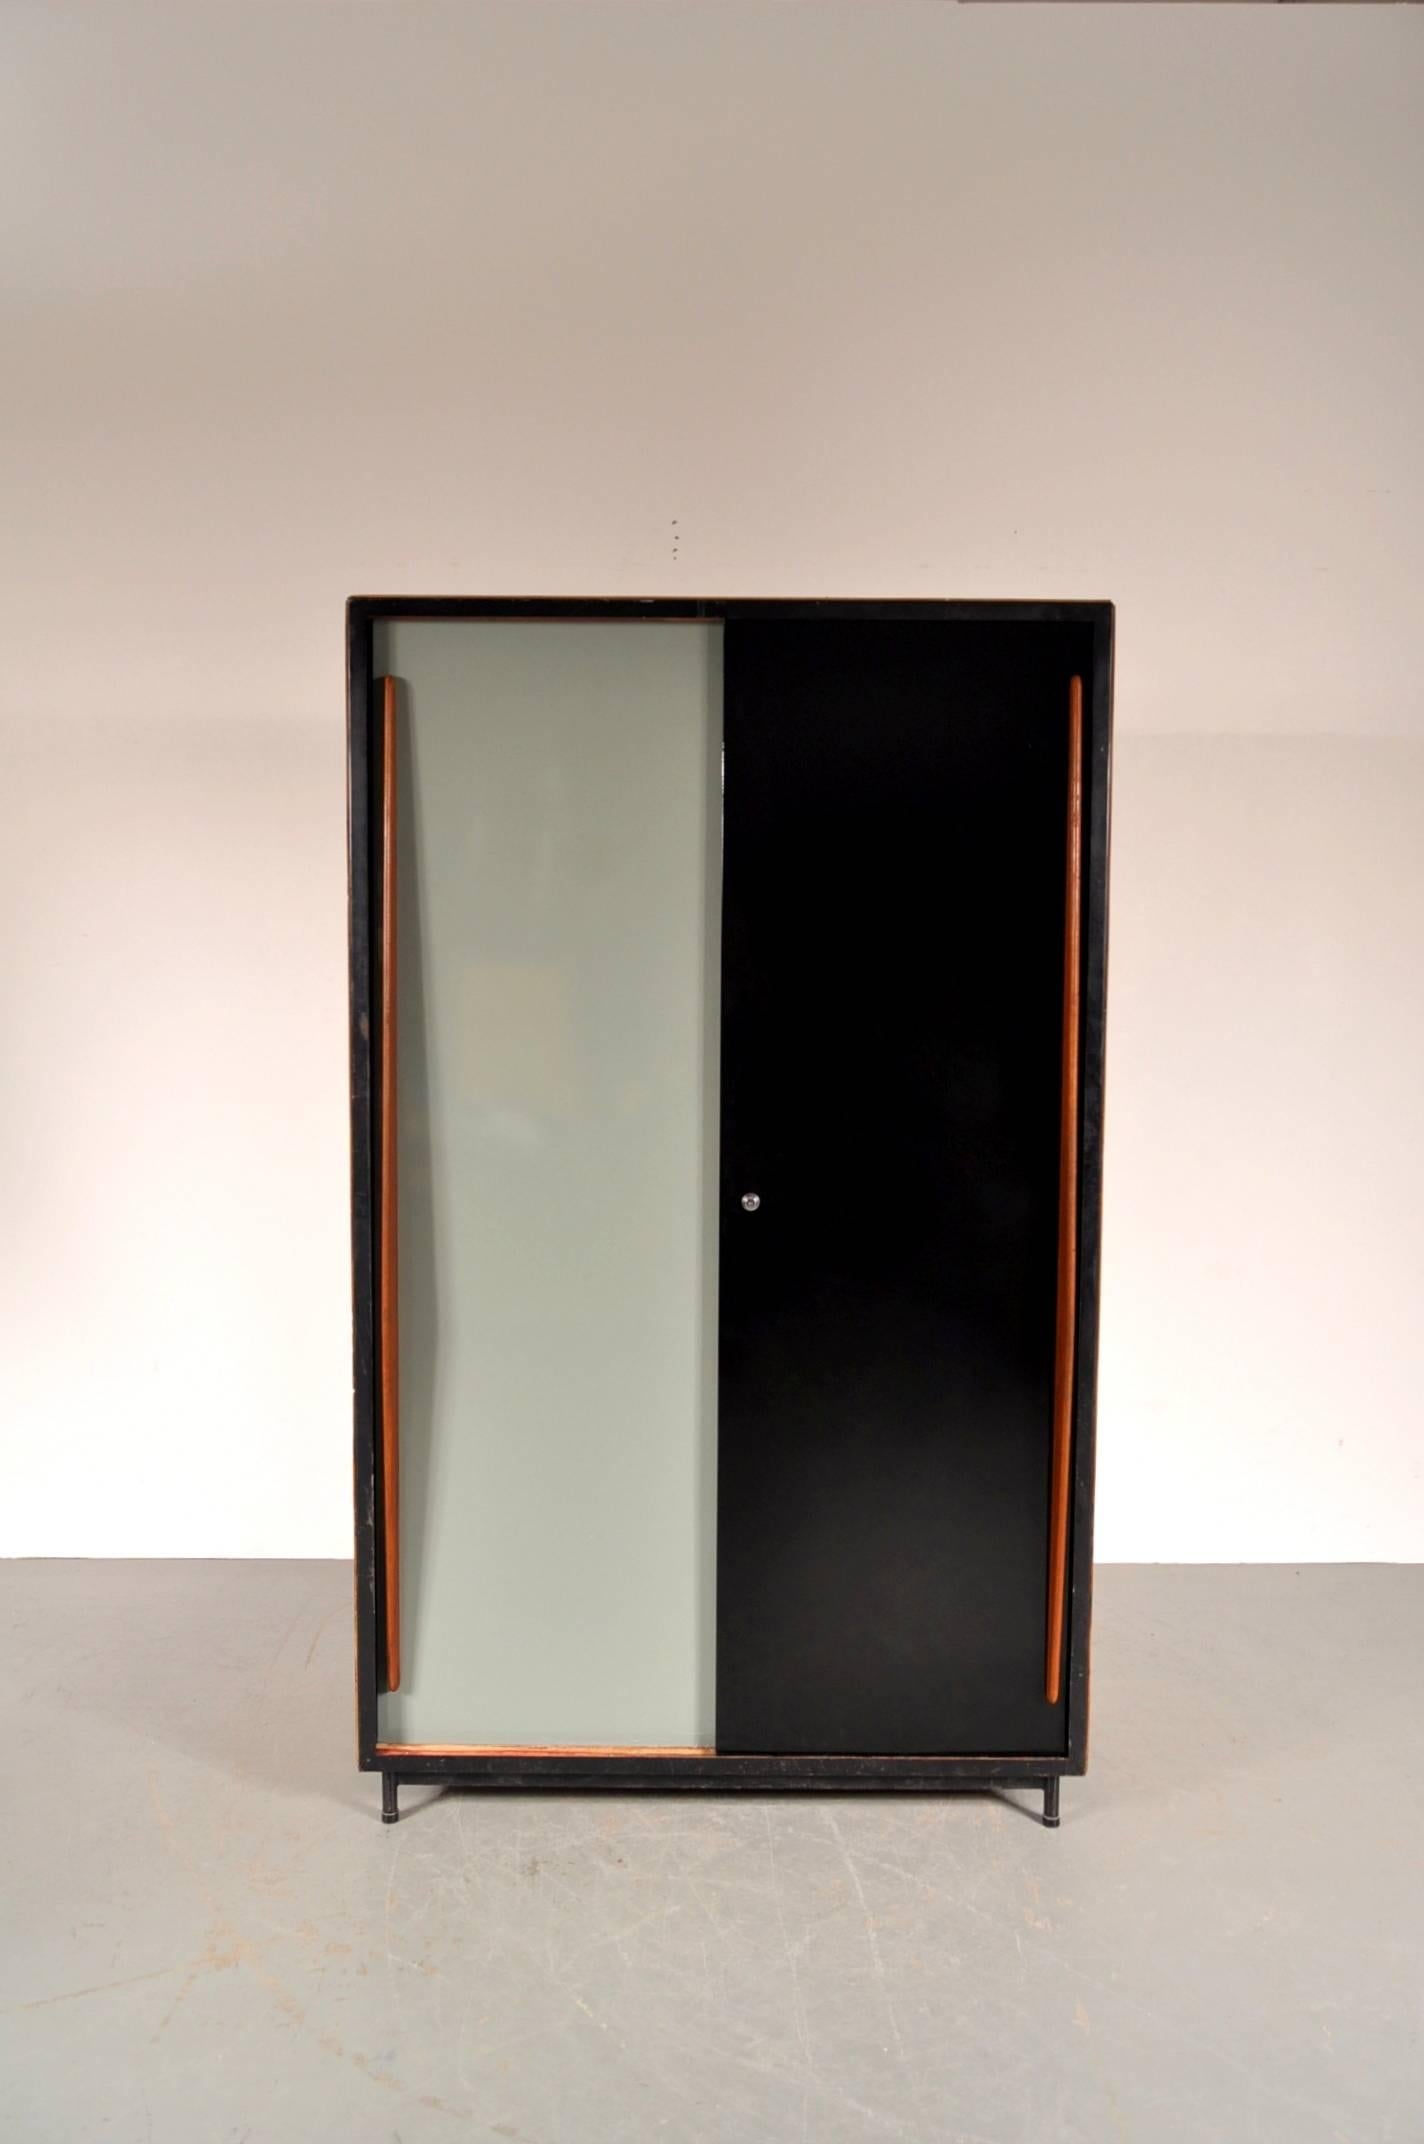 Amazing cabinet designed by Willy Van Der Meeren, manufactured by Tubax in Belgium in 1952.

This cabinet is made of beautiful quality wood on a black metal structure. The real eye-catchers are the black and white metal sliding doors and the organic